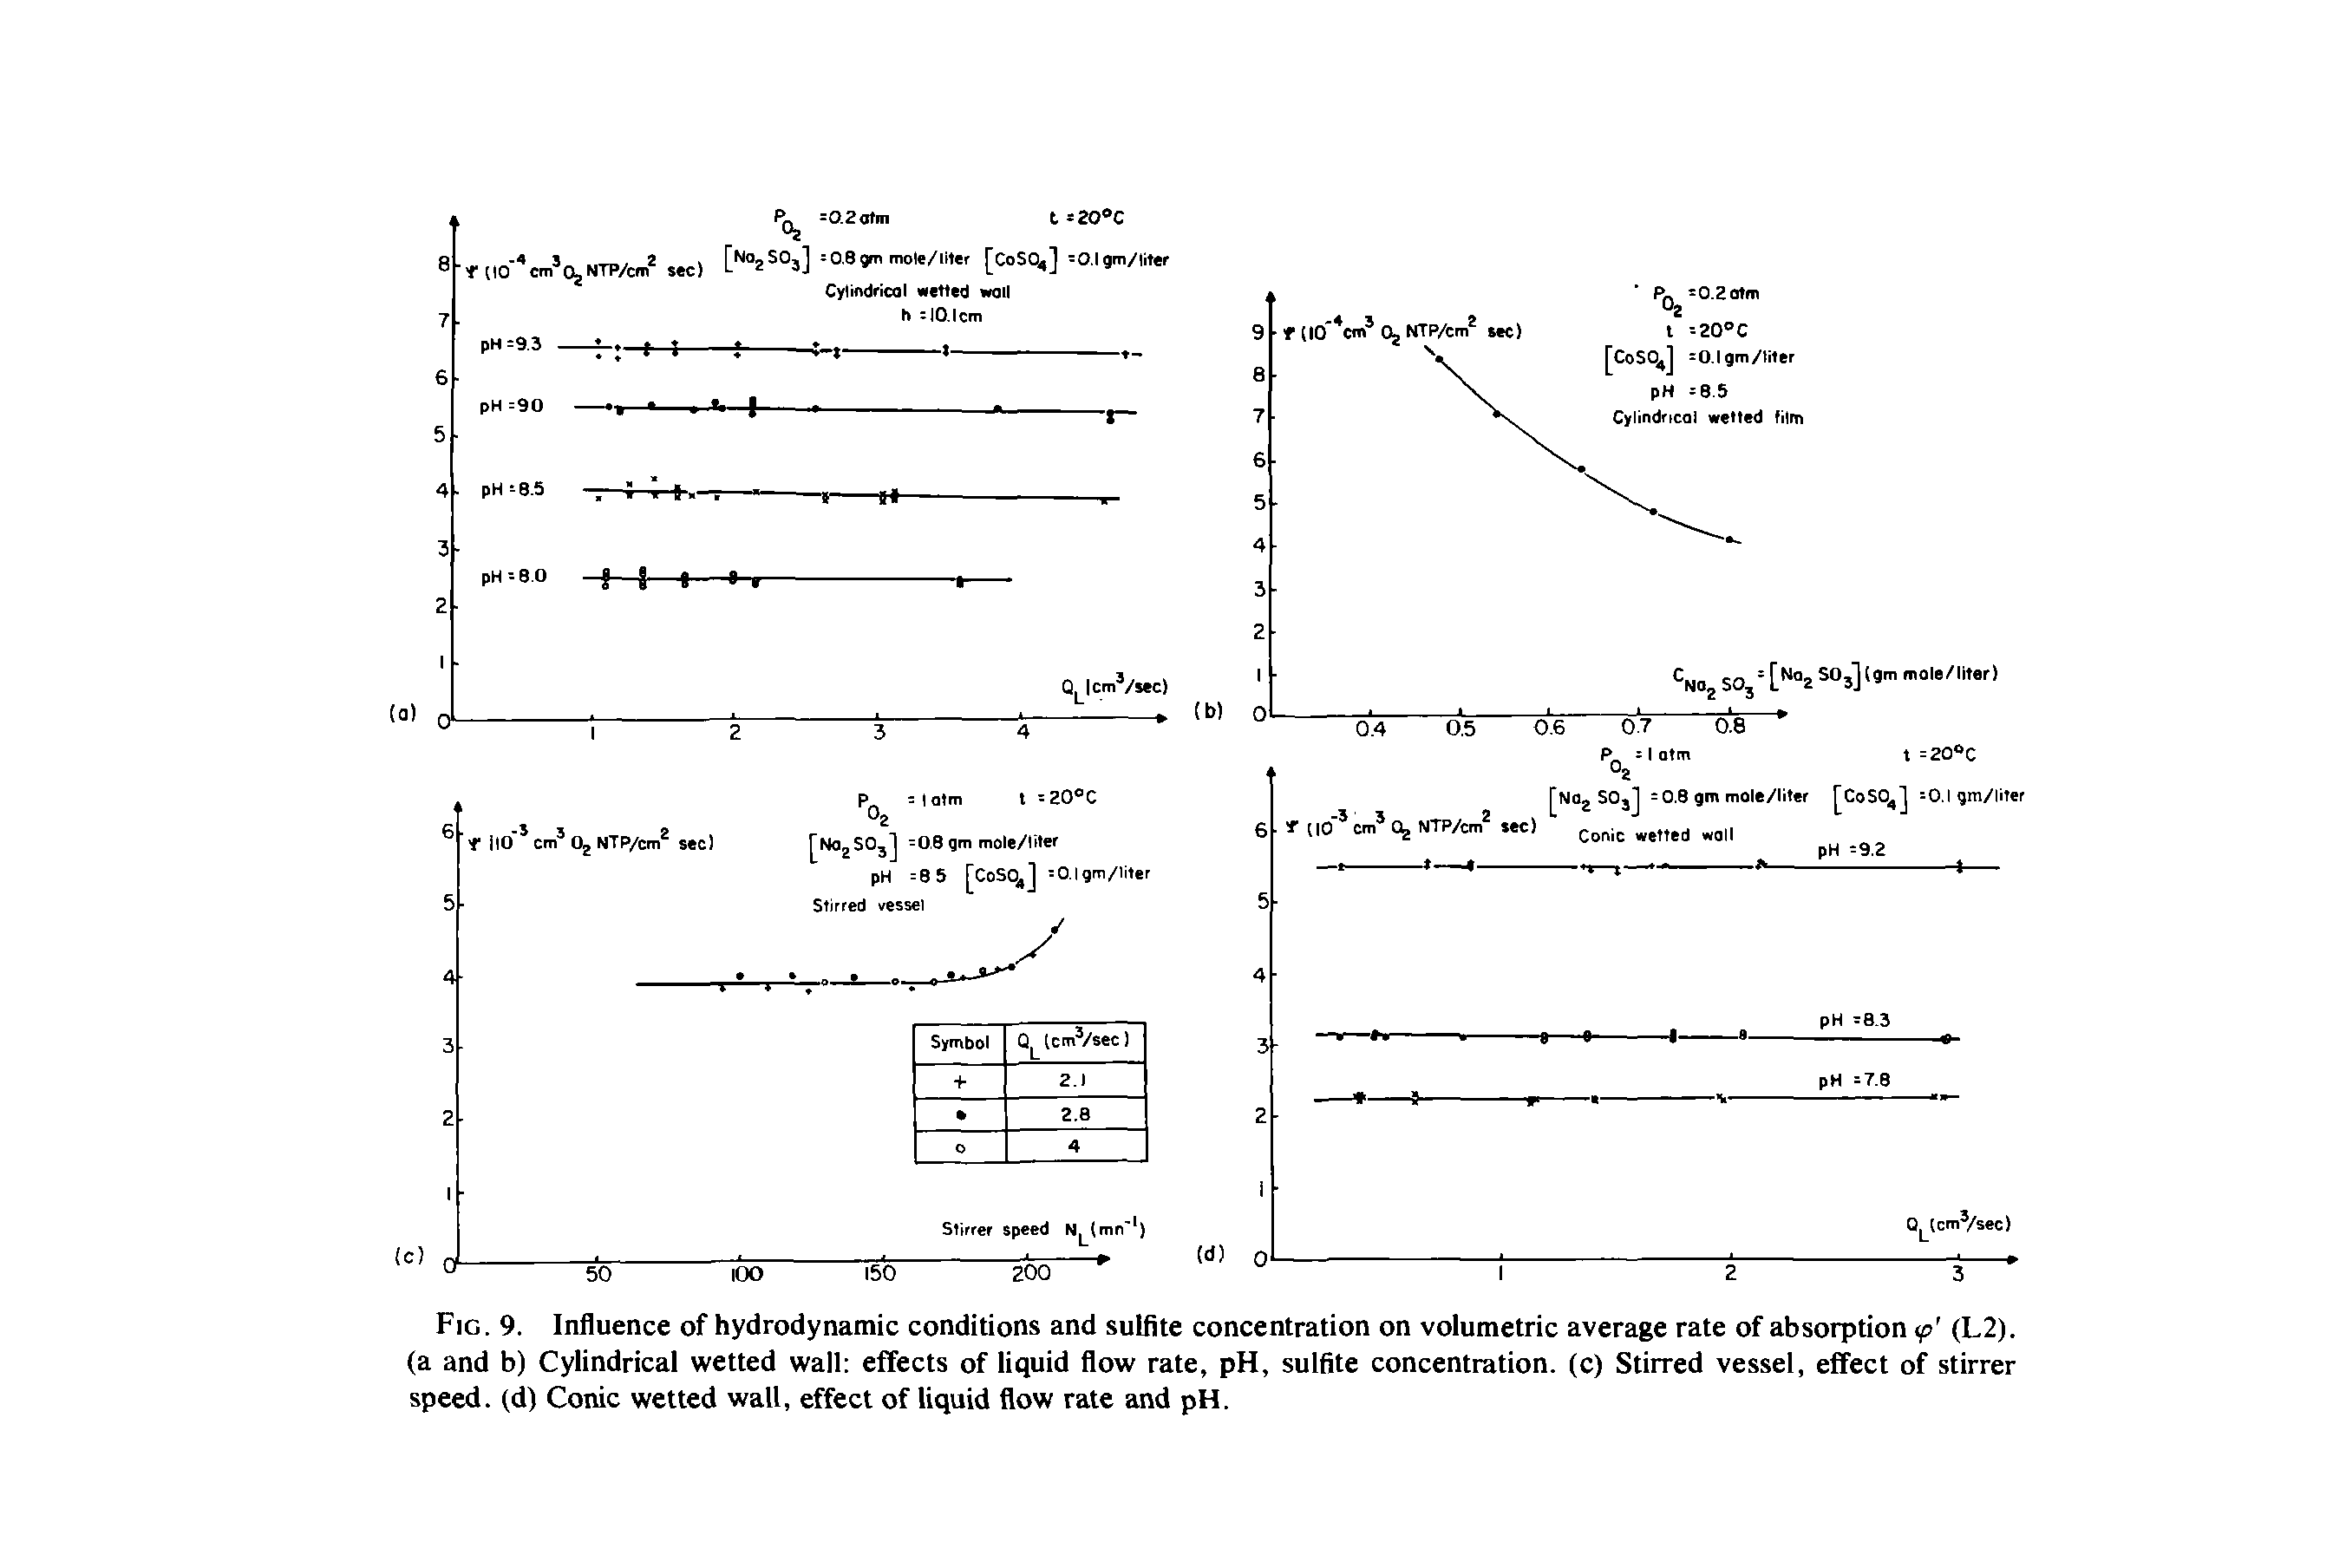 Fig. 9. Influence of hydrodynamic conditions and sulfite concentration on volumetric average rate of absorption tp (L2). (a and b) Cylindrical wetted wall effects of liquid flow rate, pH, sulfite concentration, (c) Stirred vessel, effect of stirrer speed, (d) Conic wetted wall, effect of liquid flow rate and pH.